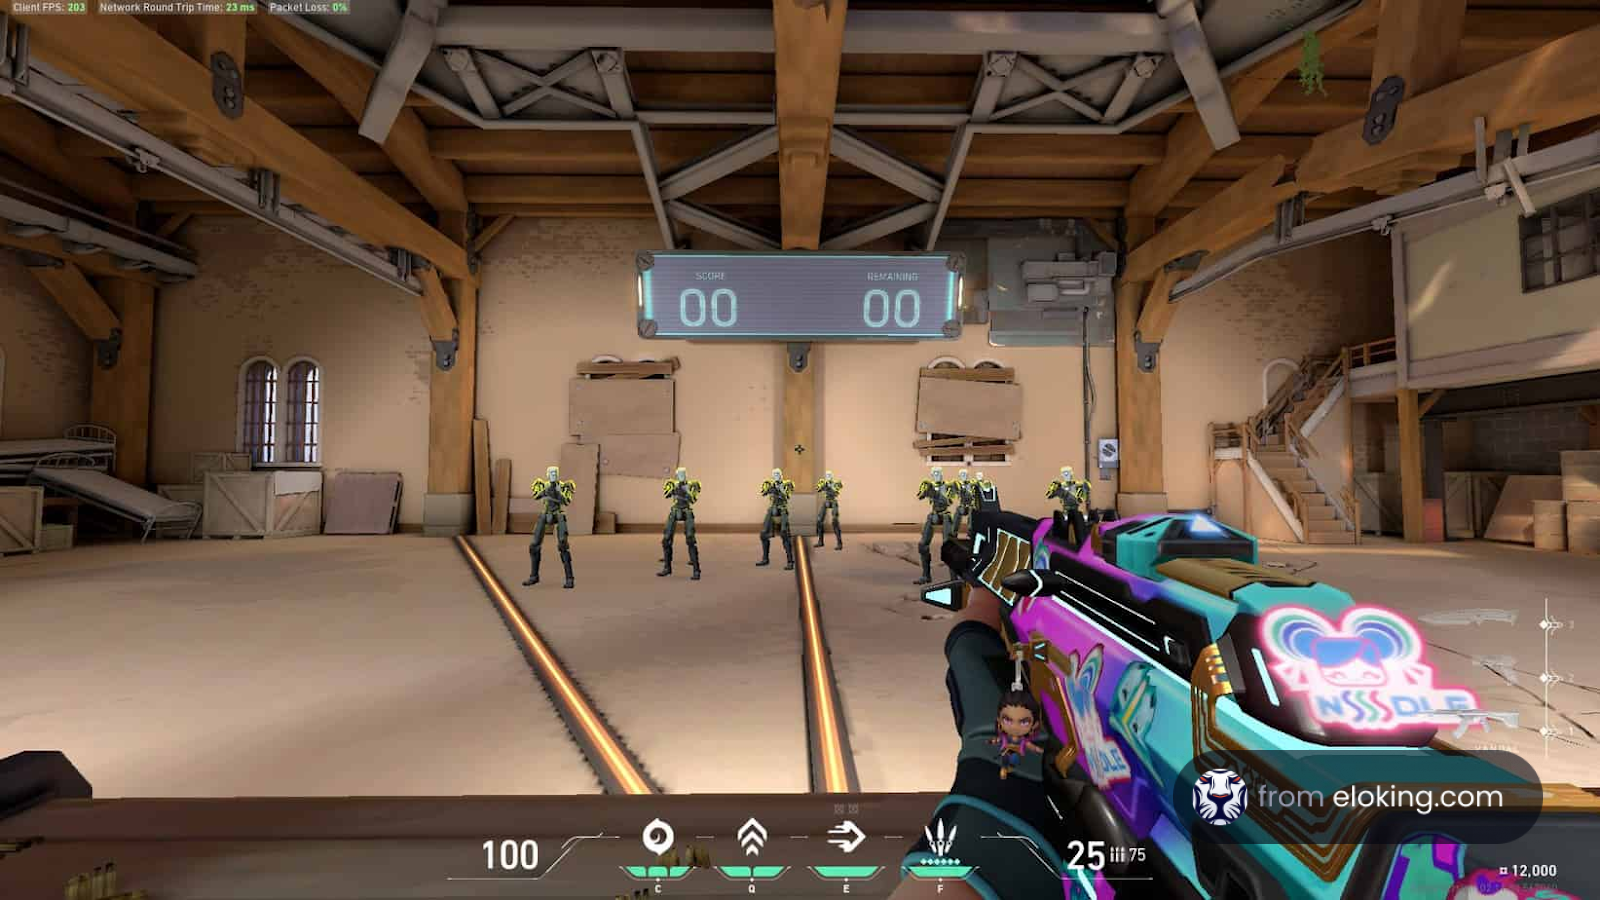 First-person view of a competitive gaming session with multiple characters